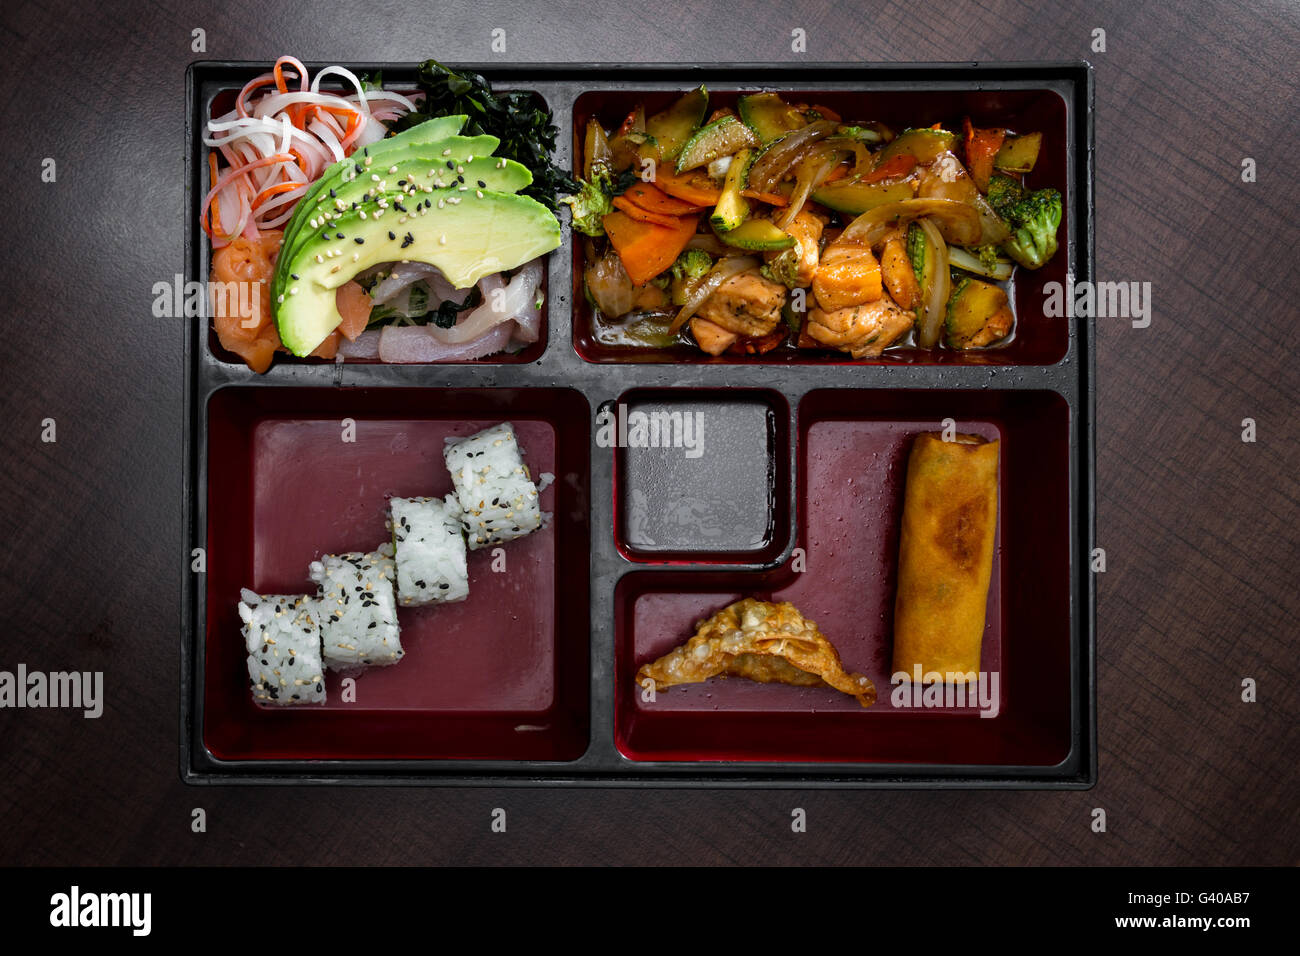 delicious meal prepared and presented restaurant style with fresh ingredients pre served as a on the go lunch choice Stock Photo